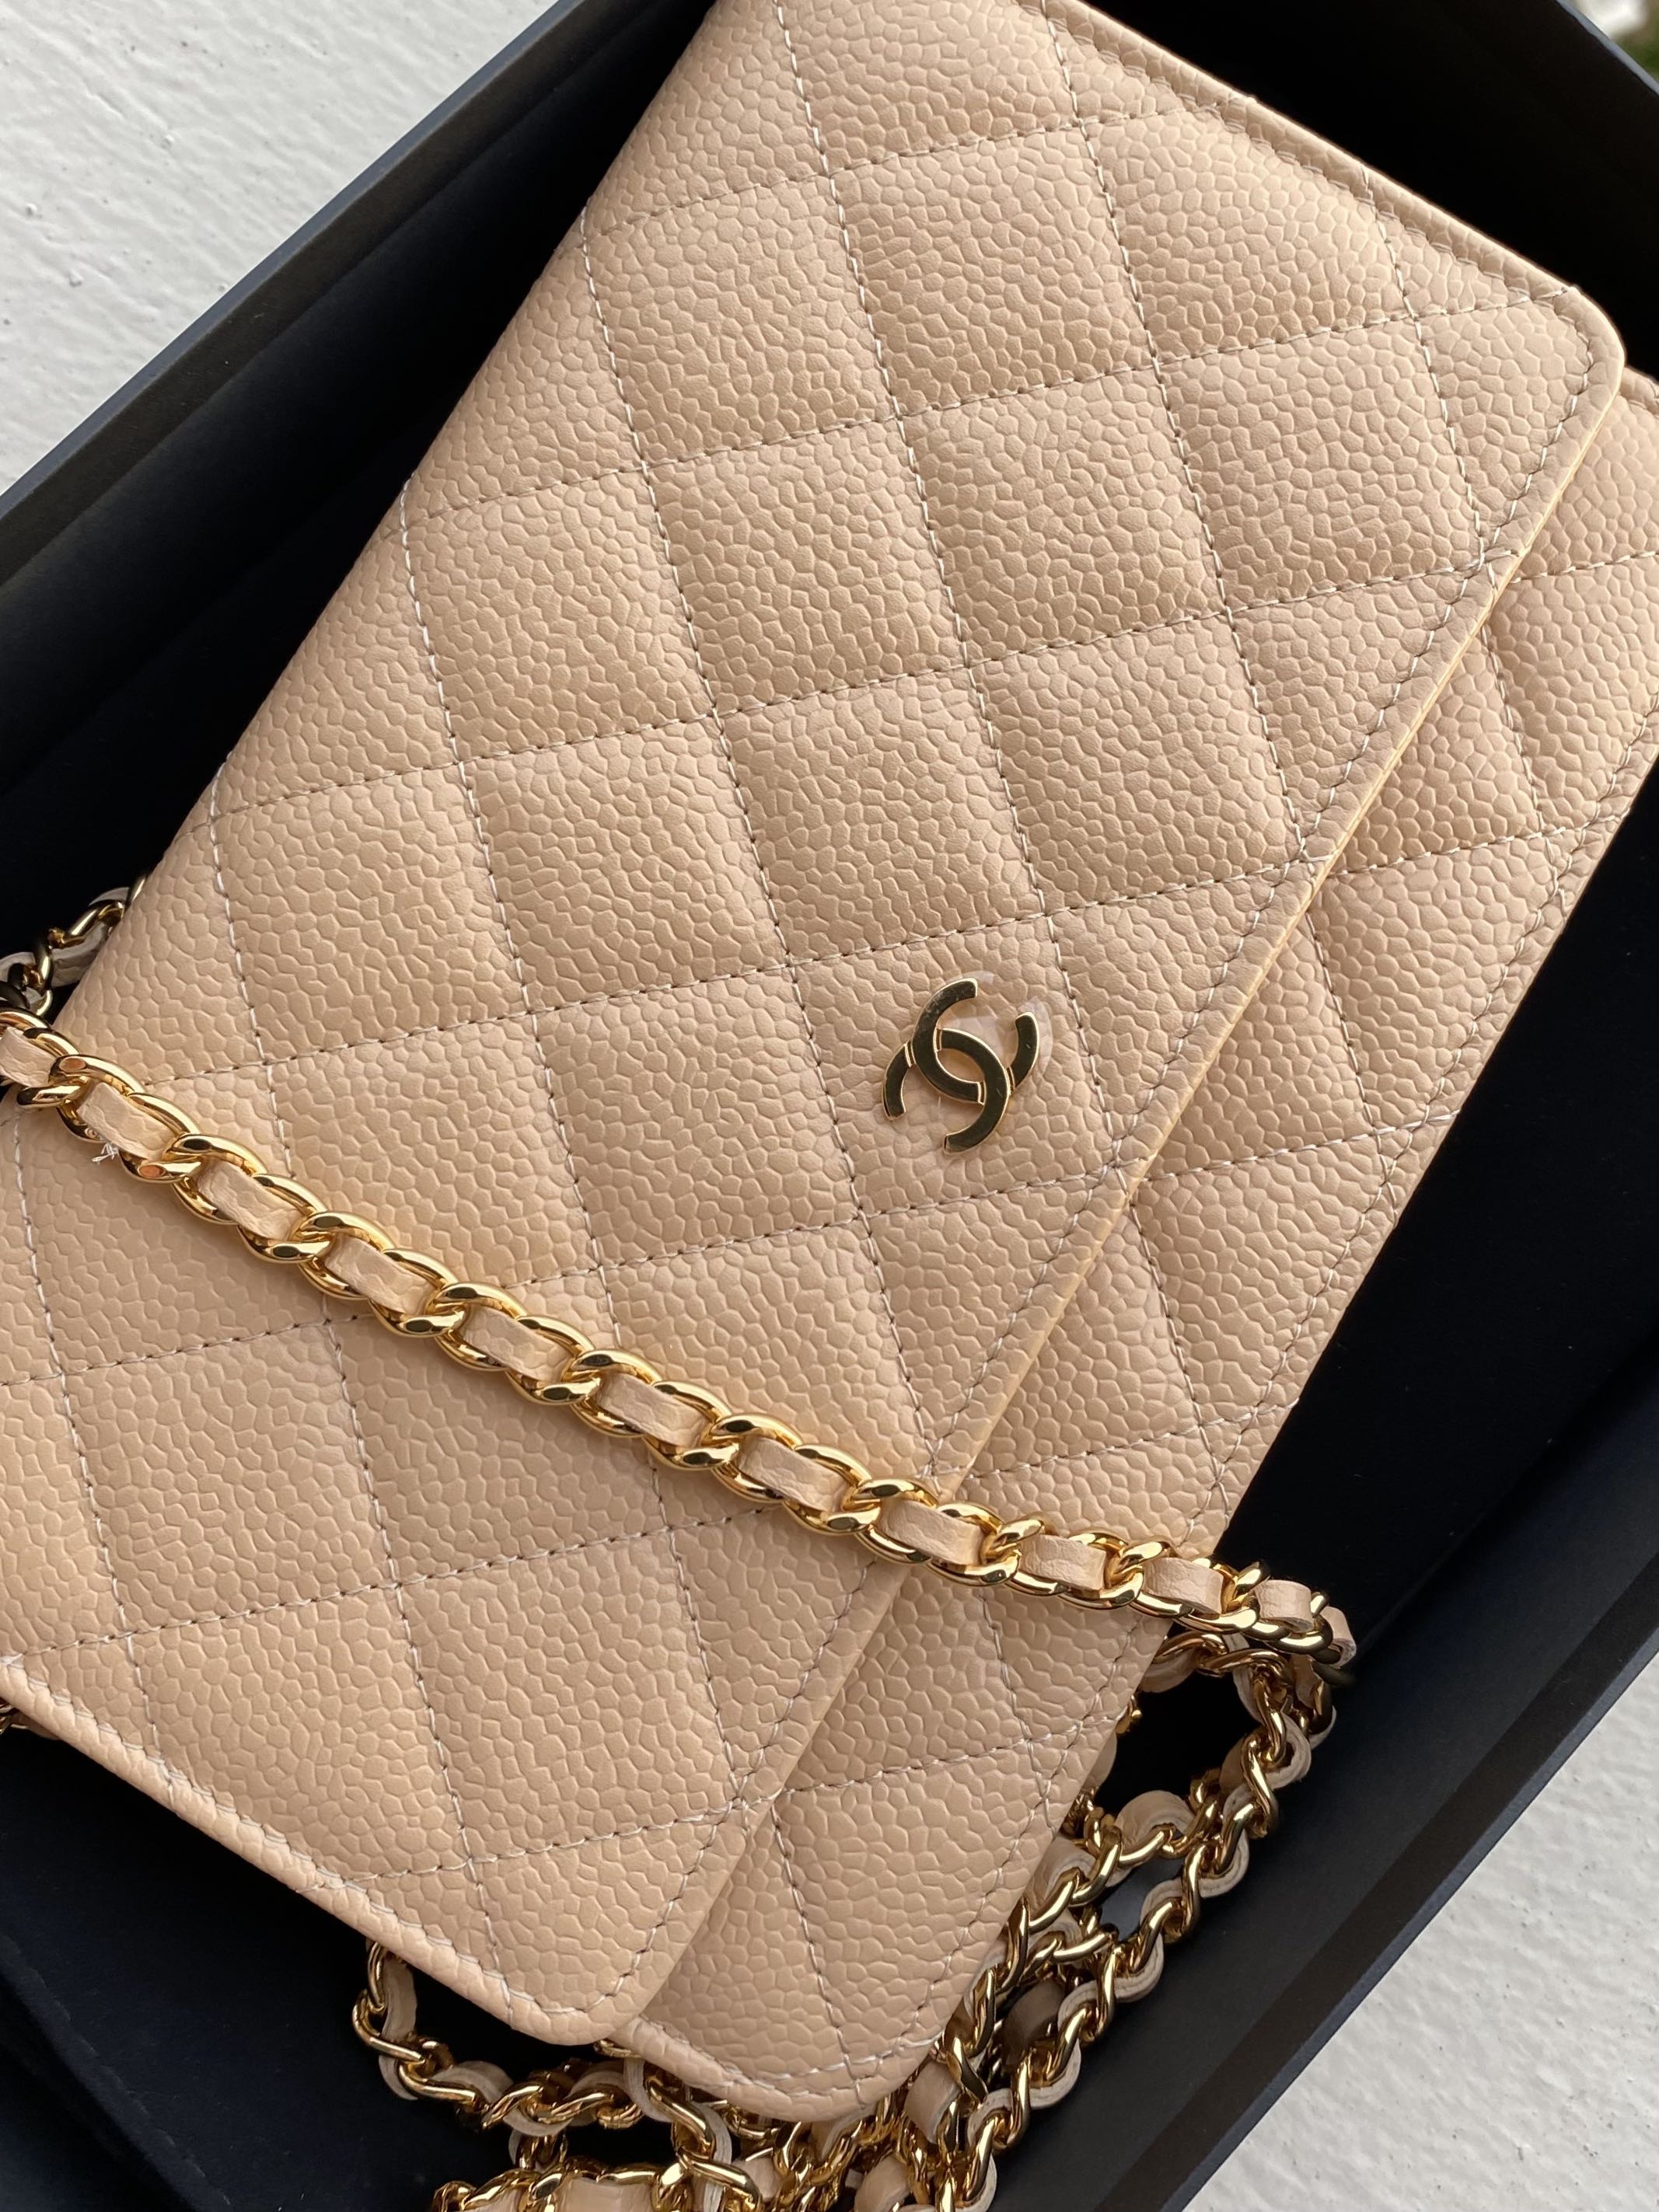 New Box CHANEL Wallet on Chain Caviar Leather Beige WOC Bag Gold MICRO CHIP